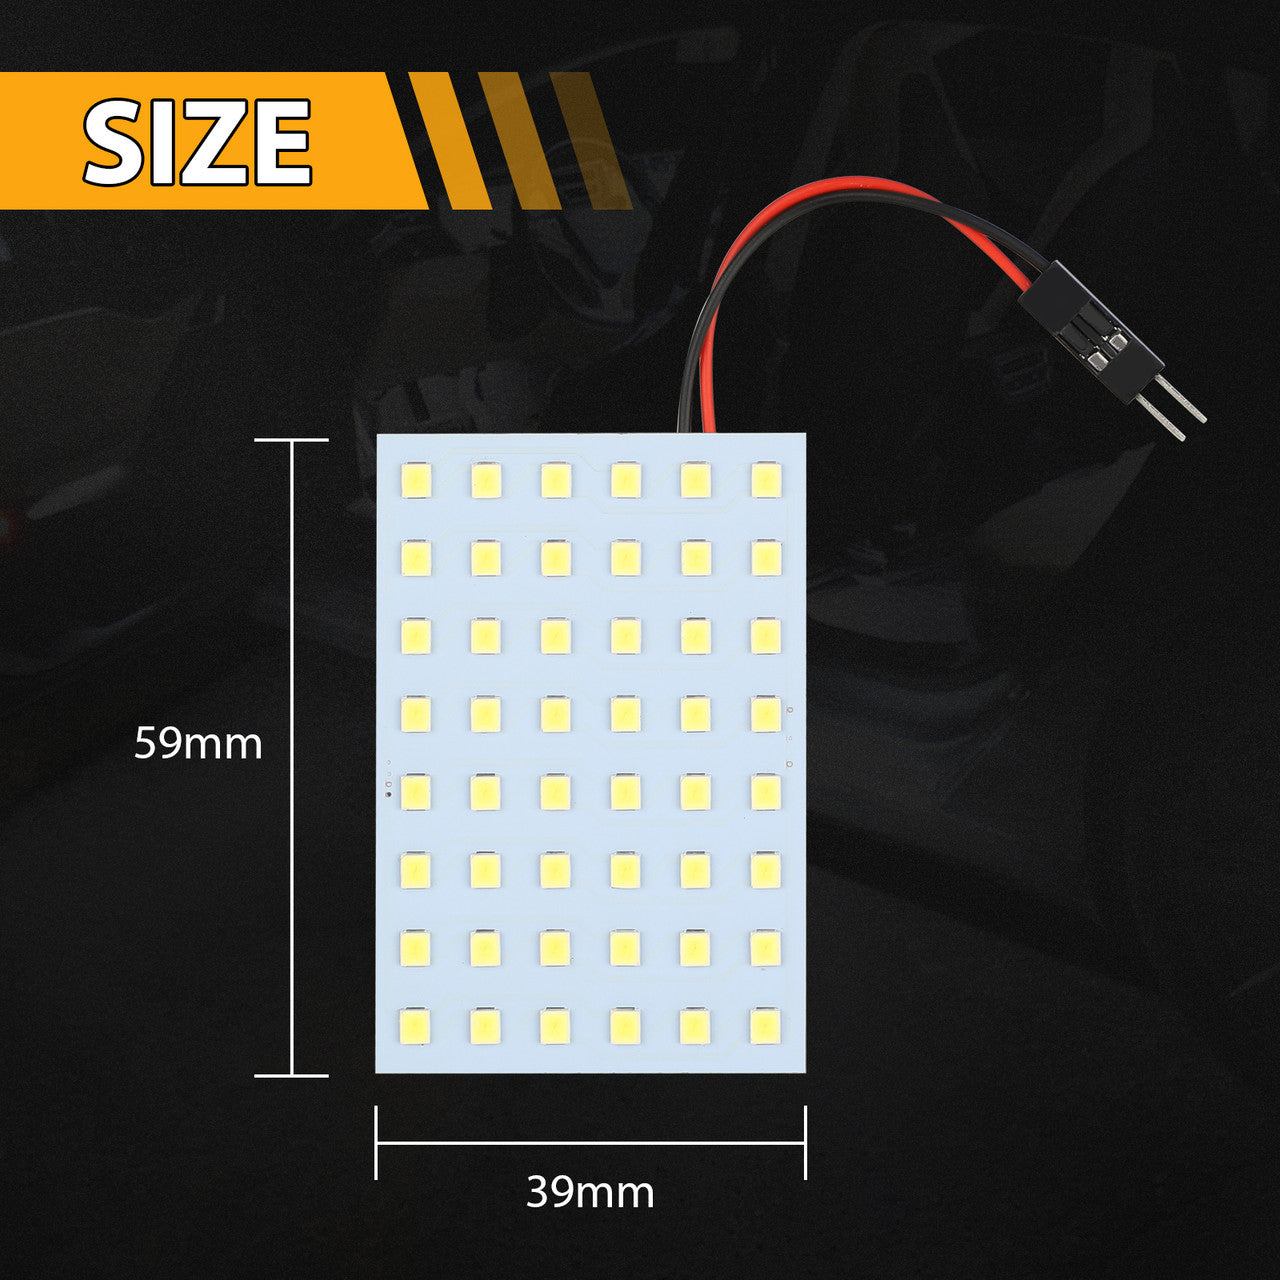 5Pcs 3528 48SMD LED Panel Dome Light Lamp, Auto Car Reading Interior Lamp, DC 12V LED Panel Dome Lamp with T10/ BA9S/ Festoon Adapters for Map, Reading, Side Door, Cargo Lights, 6000k White